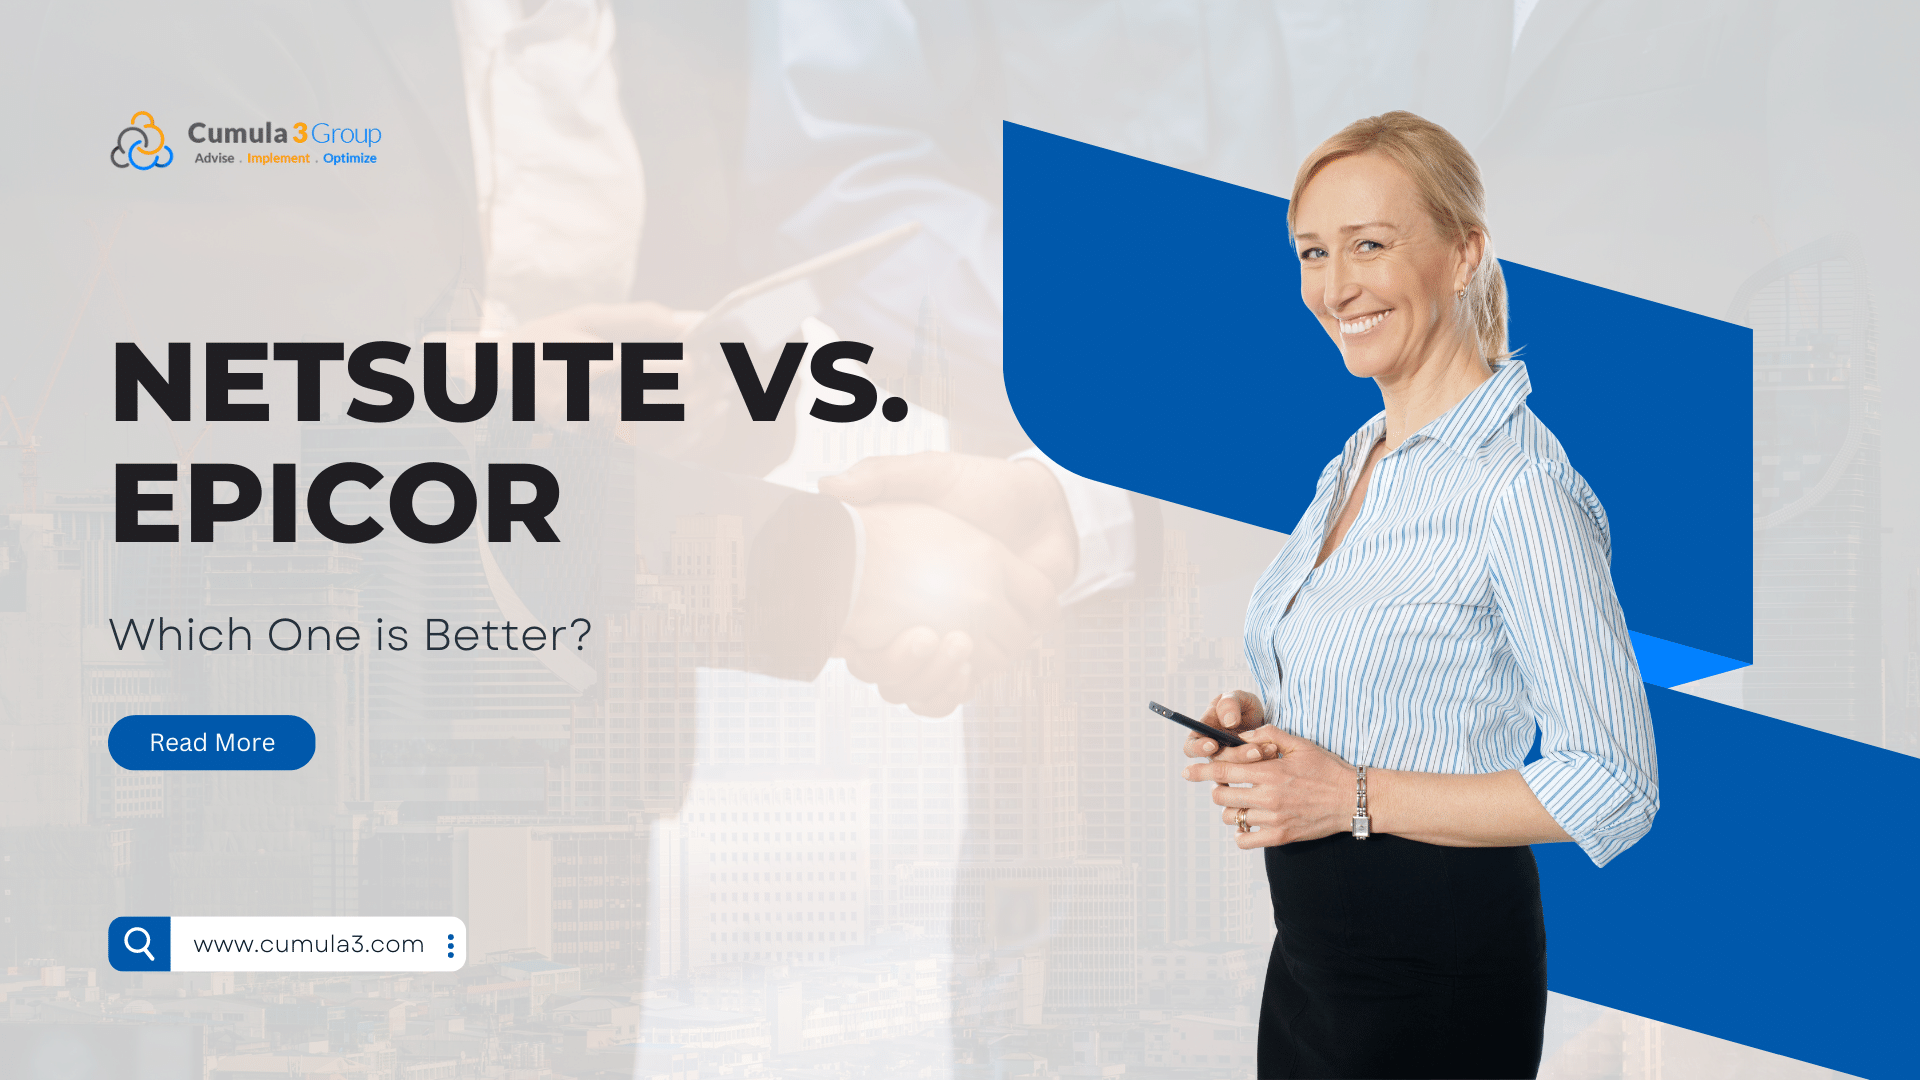 NetSuite vs. Epicor: Which is best?